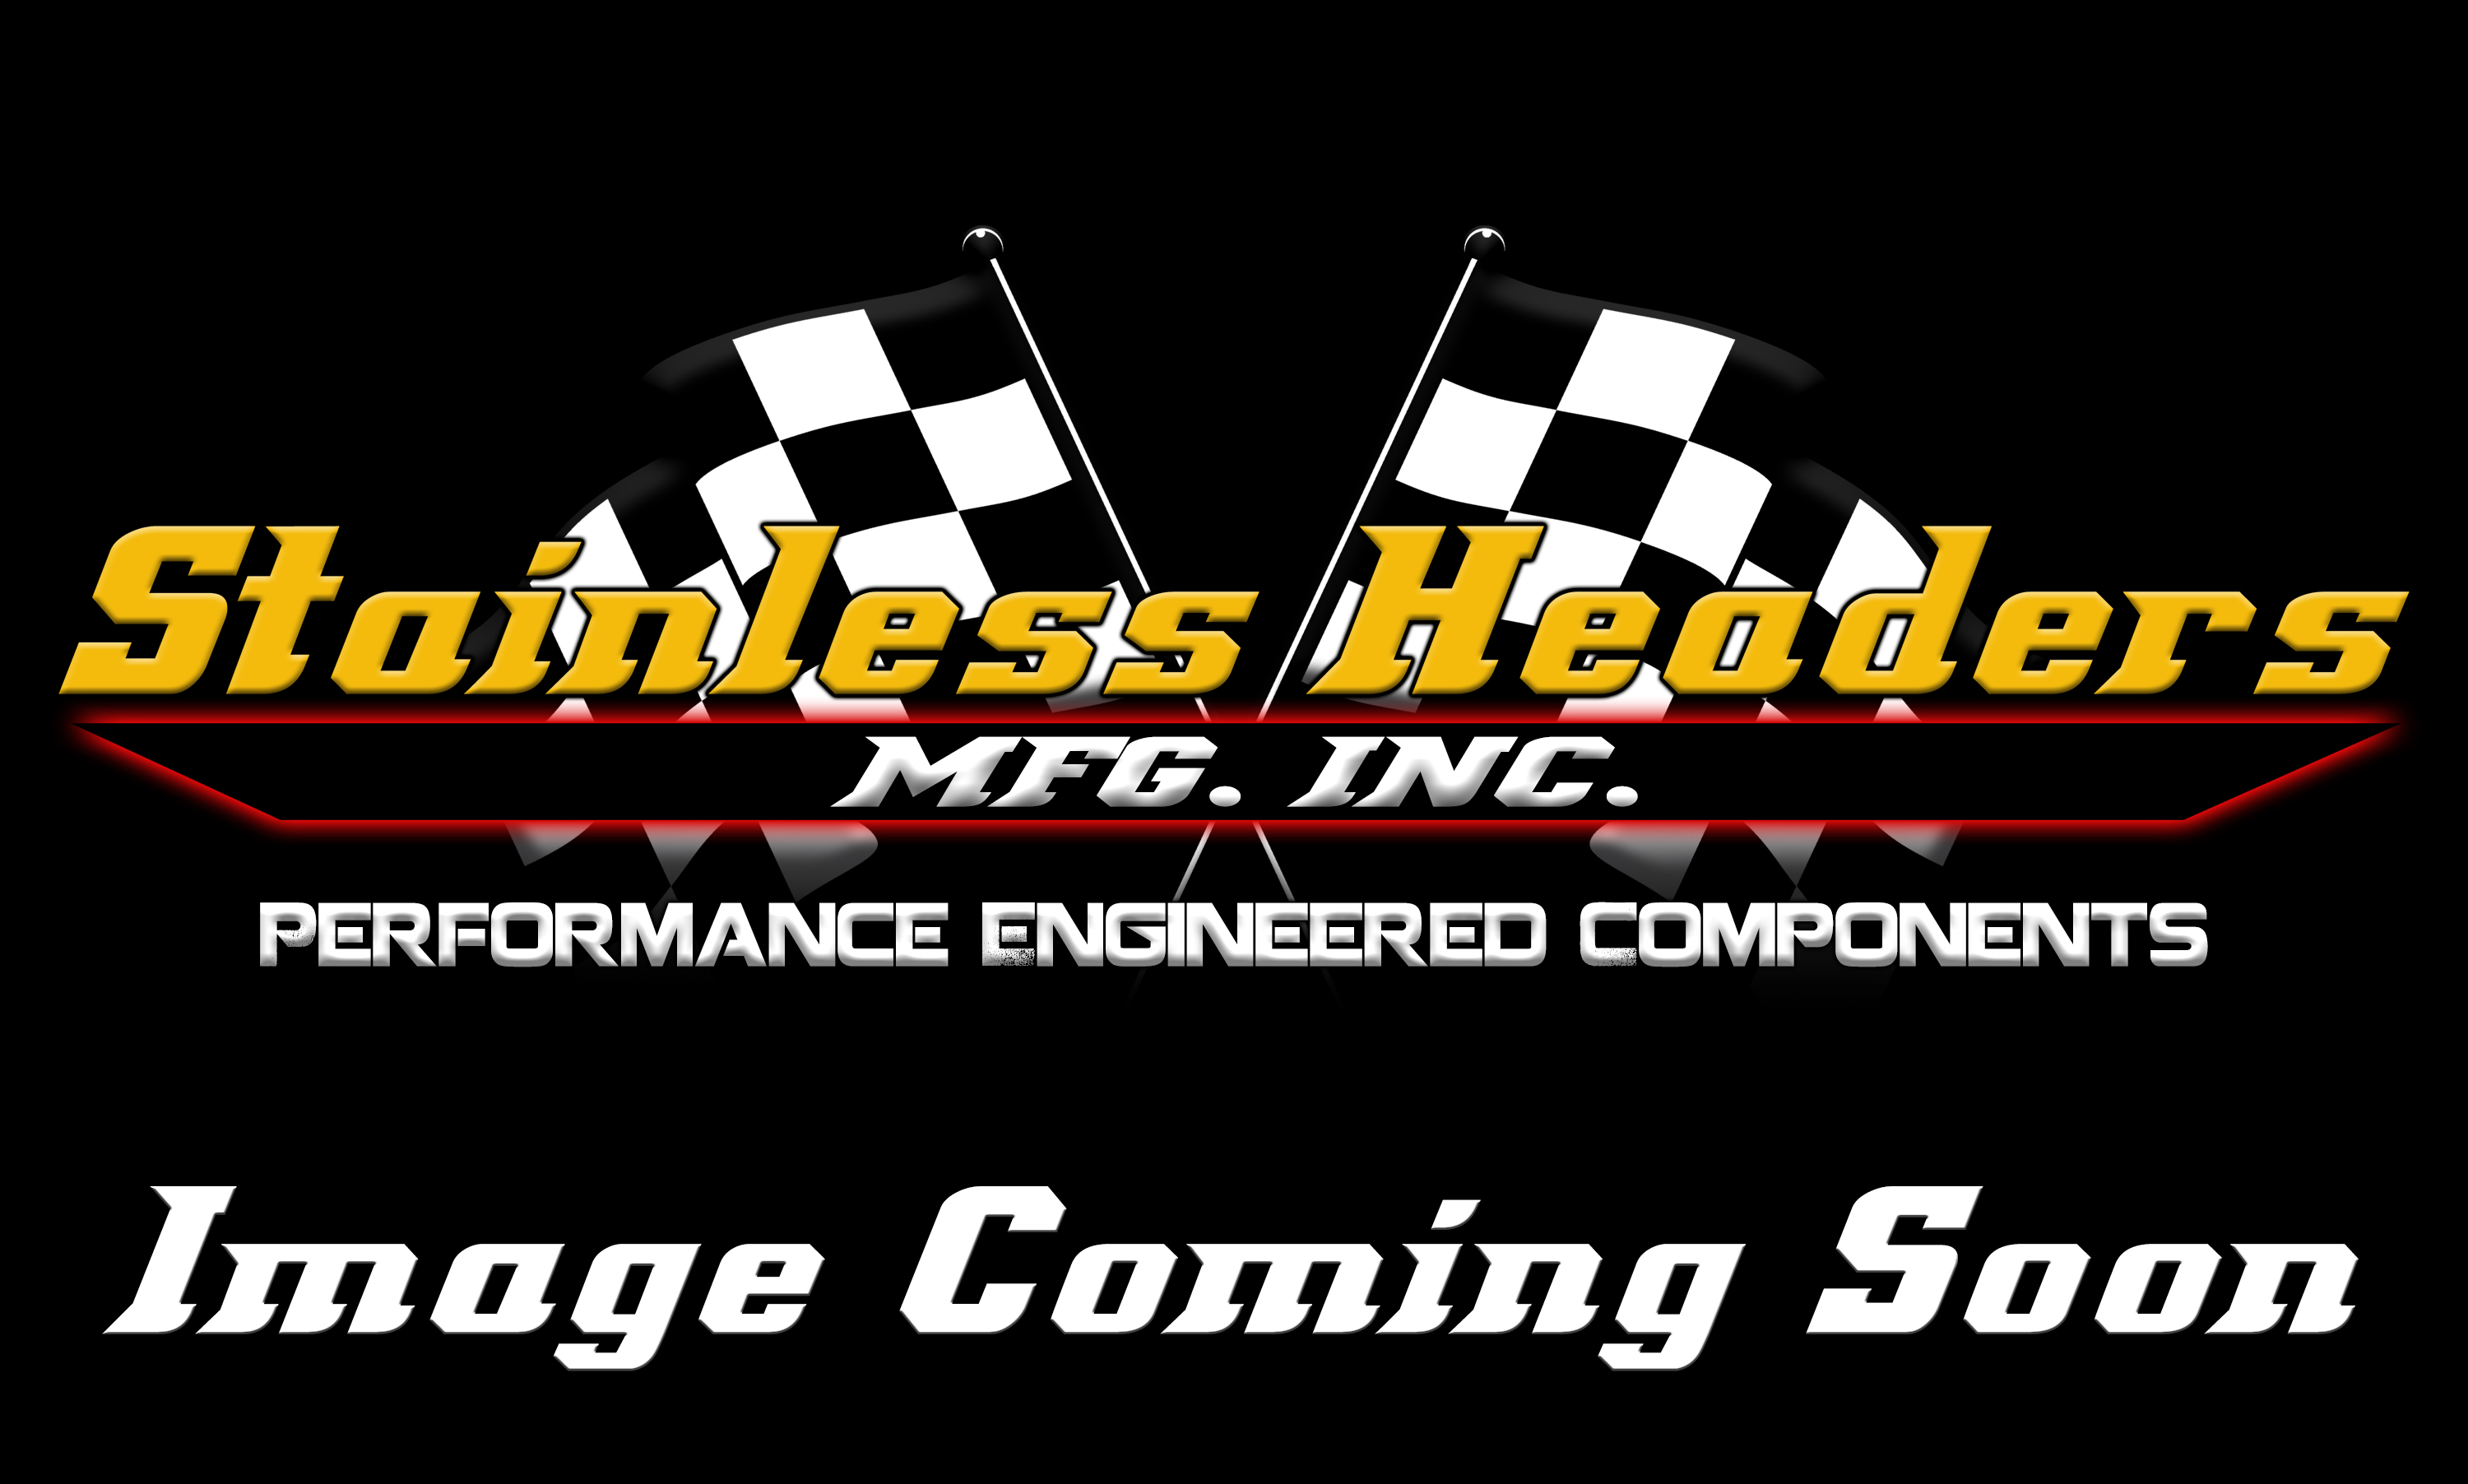 Stainless Headers - 1 5/8" Primary 6 into 1 Performance Merge Collector-16ga 321ss - Image 1